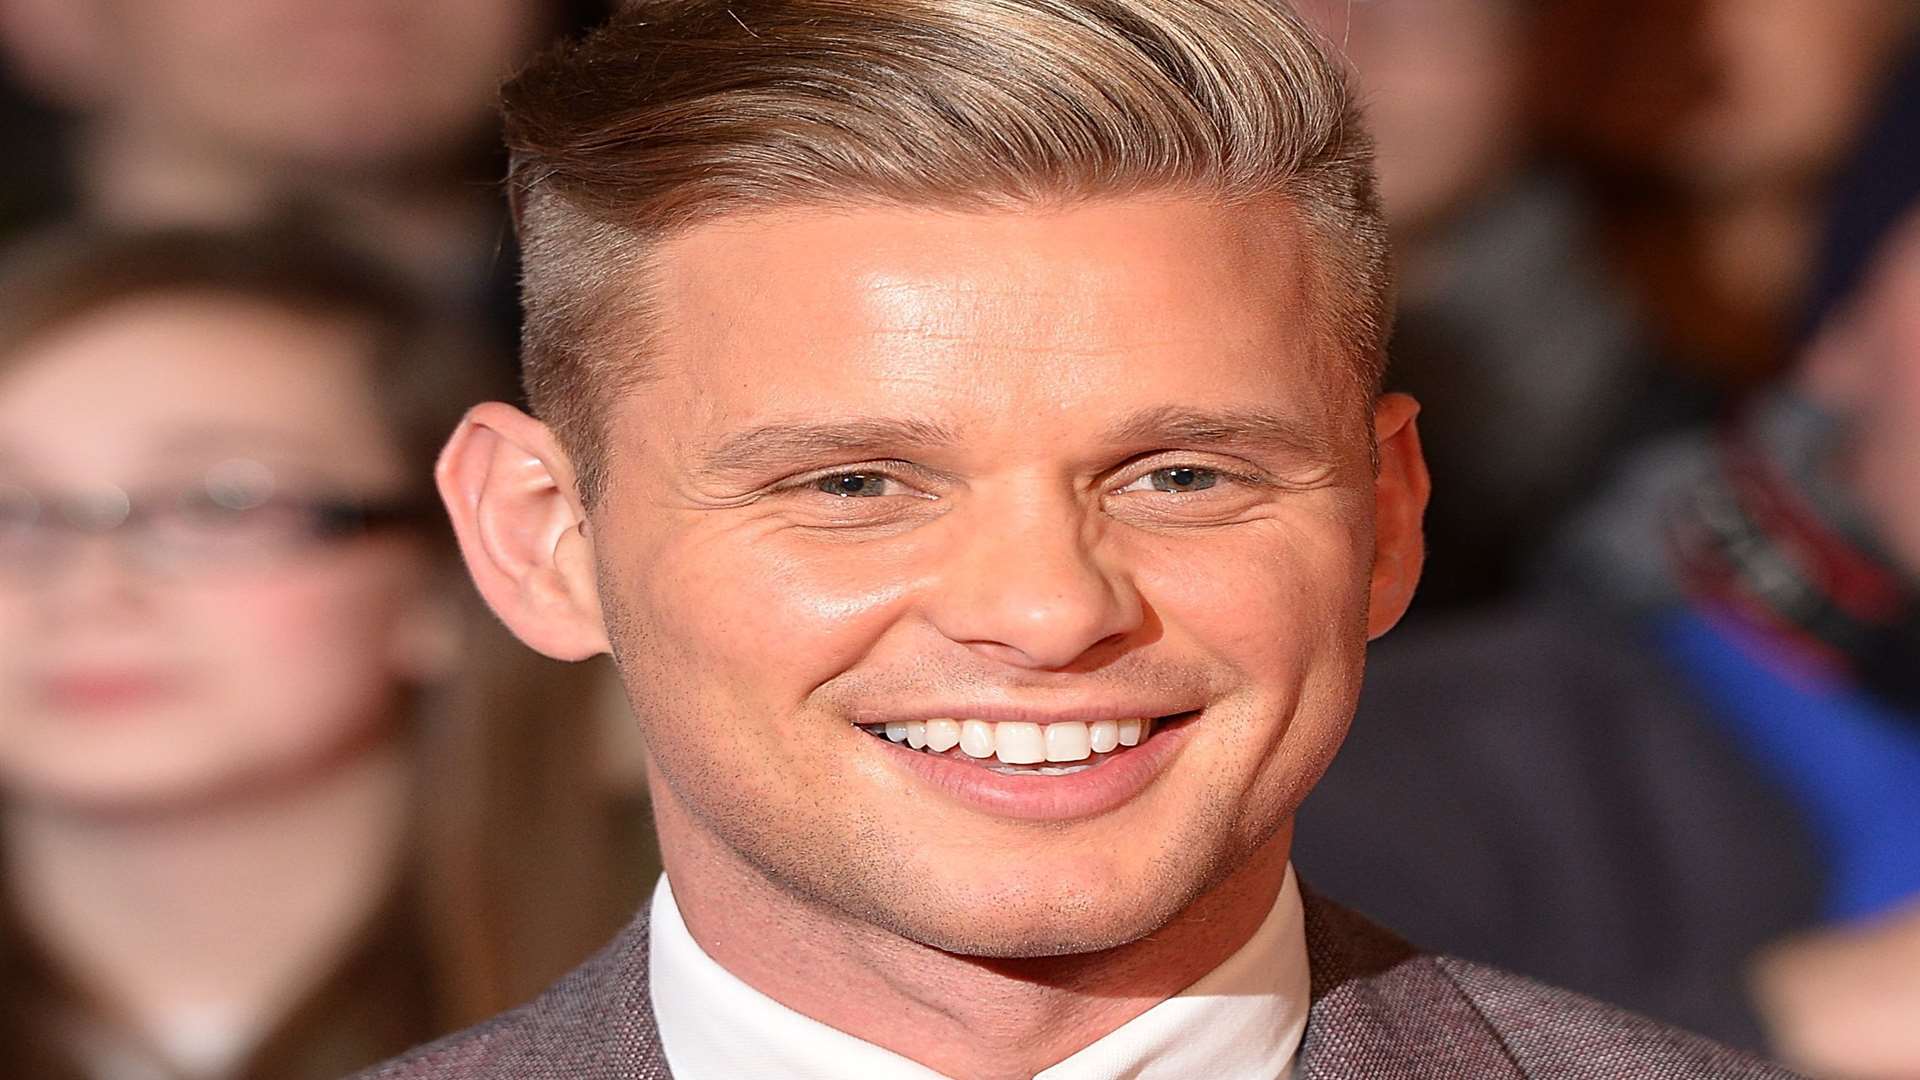 Jeff Brazier is a dad of two